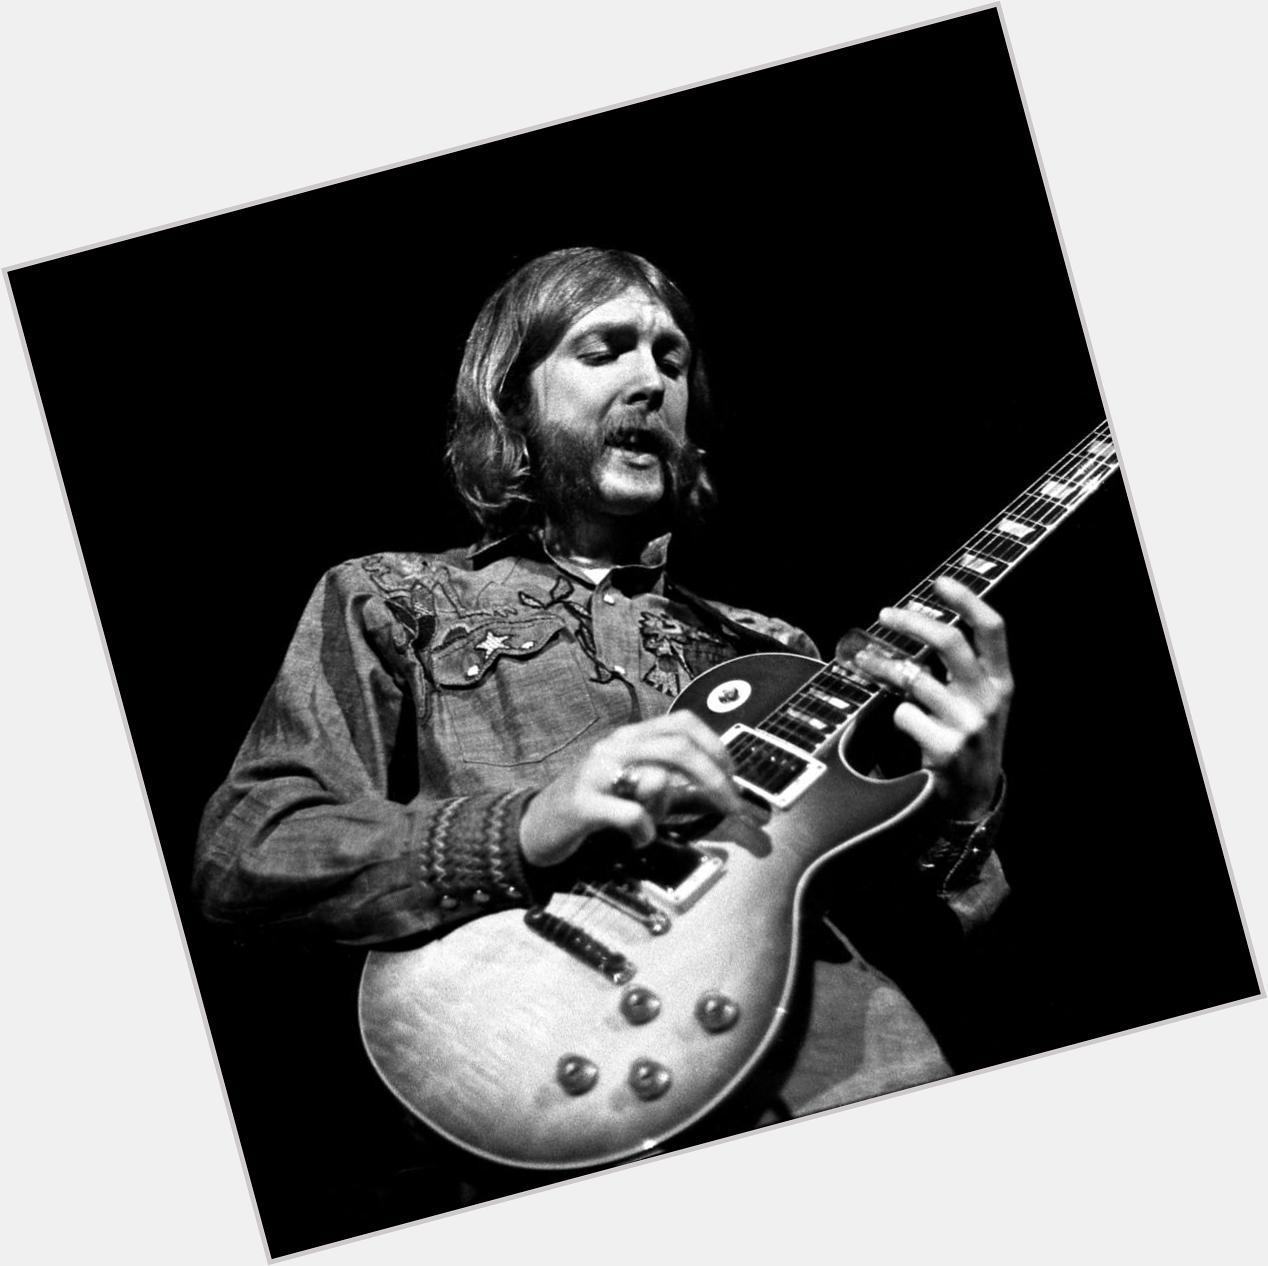 Happy birthday to one of my idols, Duane Allman. Ill be listening to Live at Fillmore East tonight. RIP Skydog. 